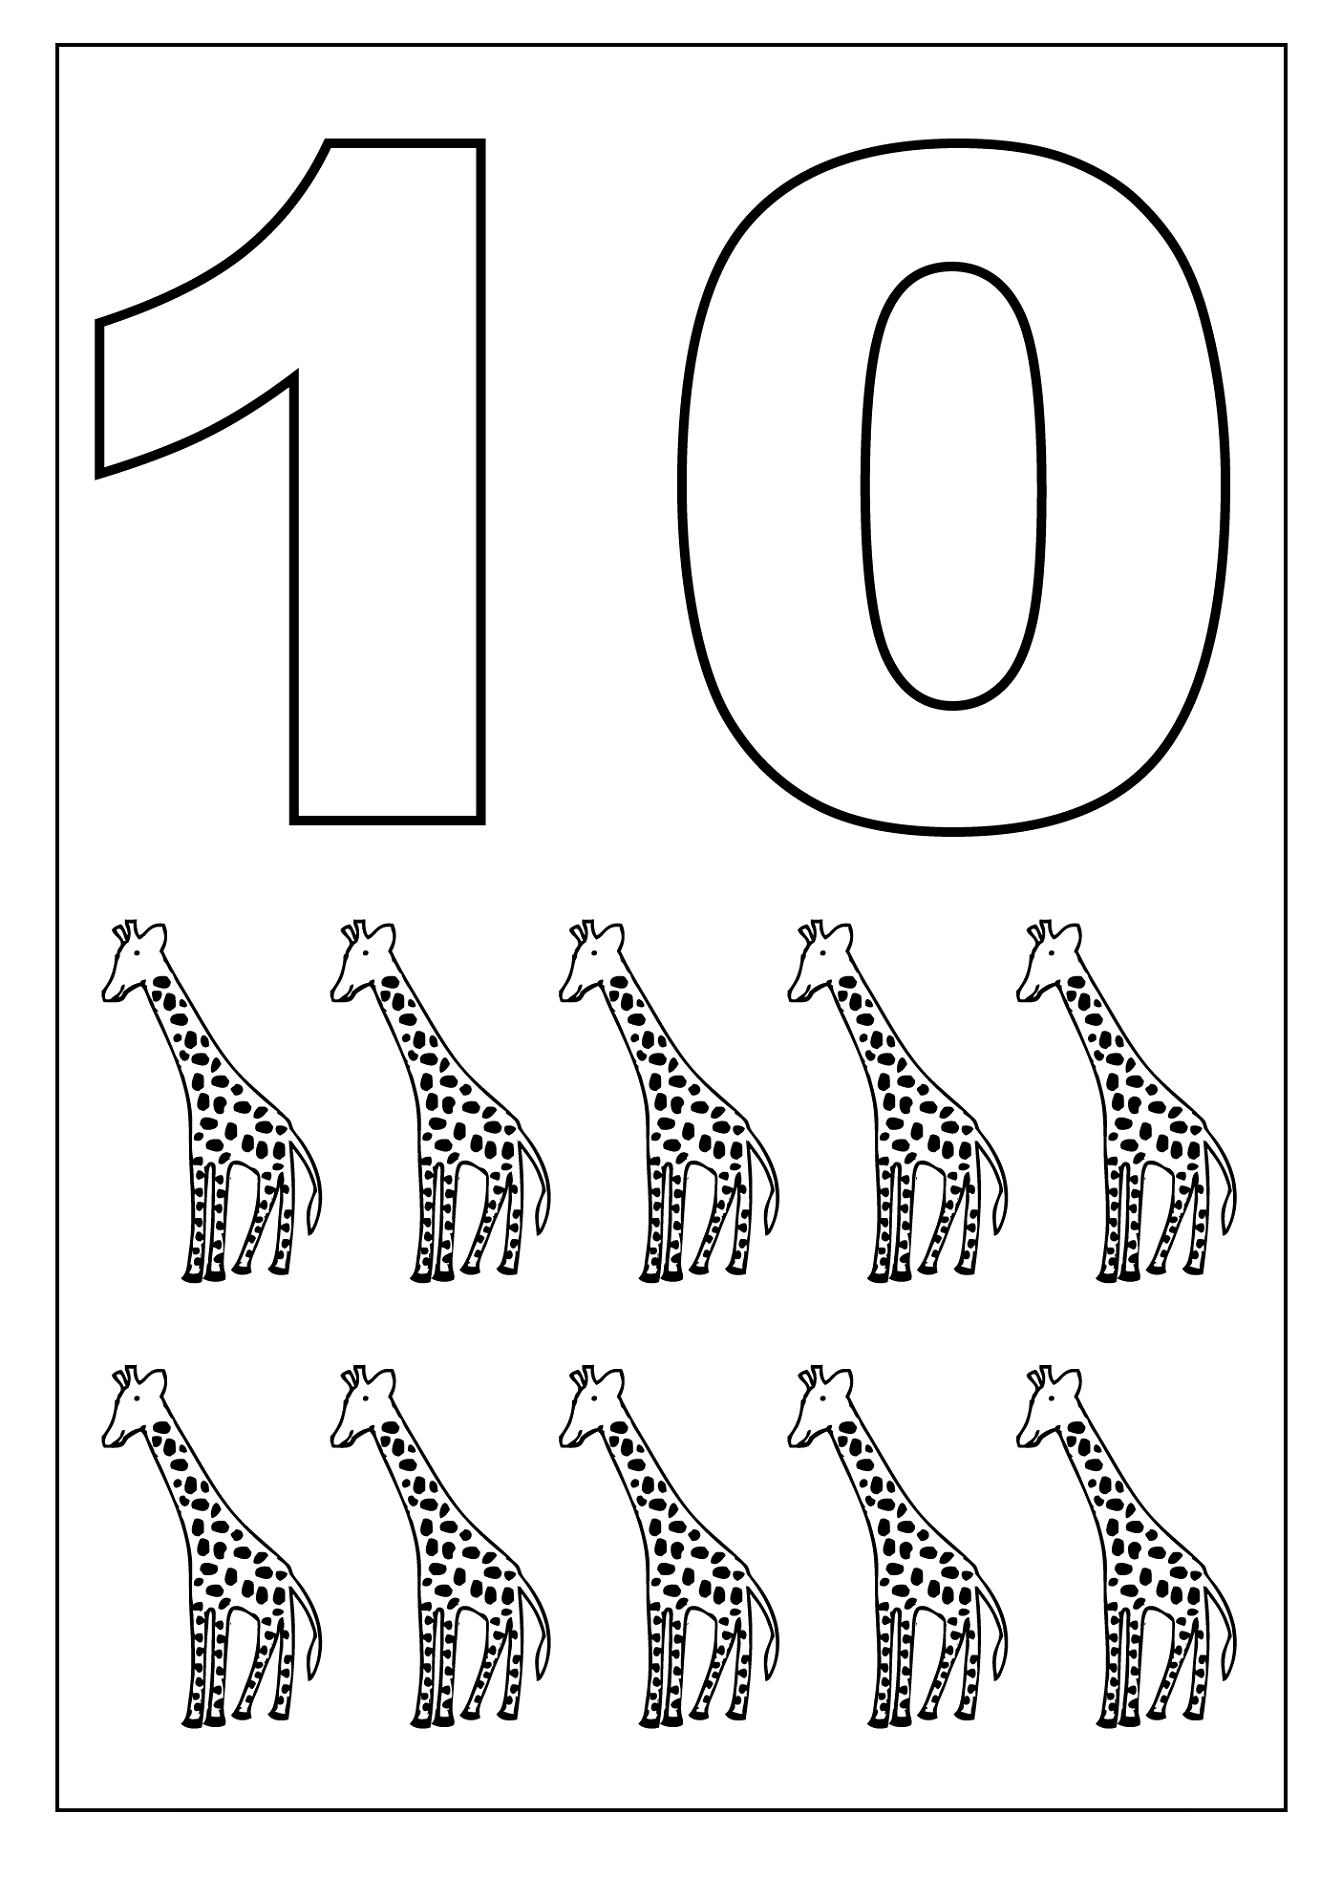 printable-pictures-of-number-10-activity-shelter